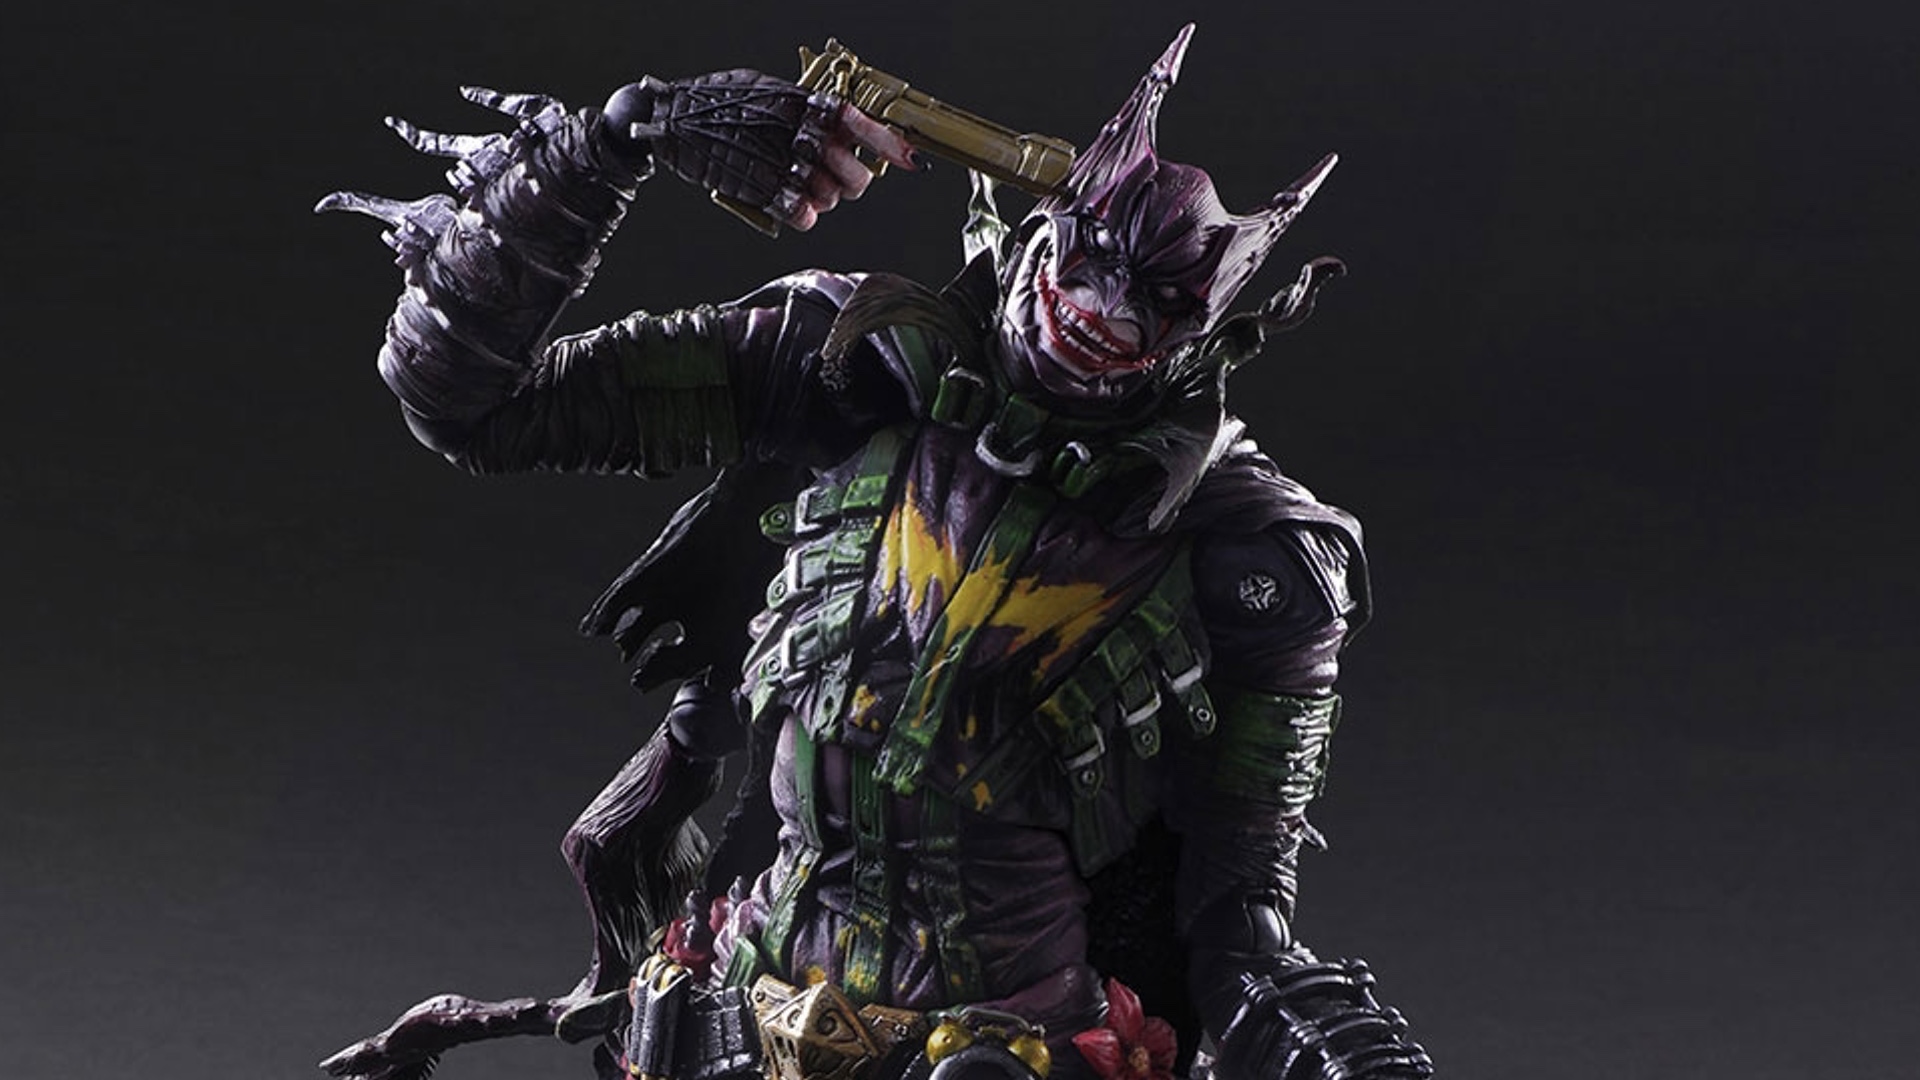 Square Enix Unveiled Their Wicked Batman and Joker Mashup Action